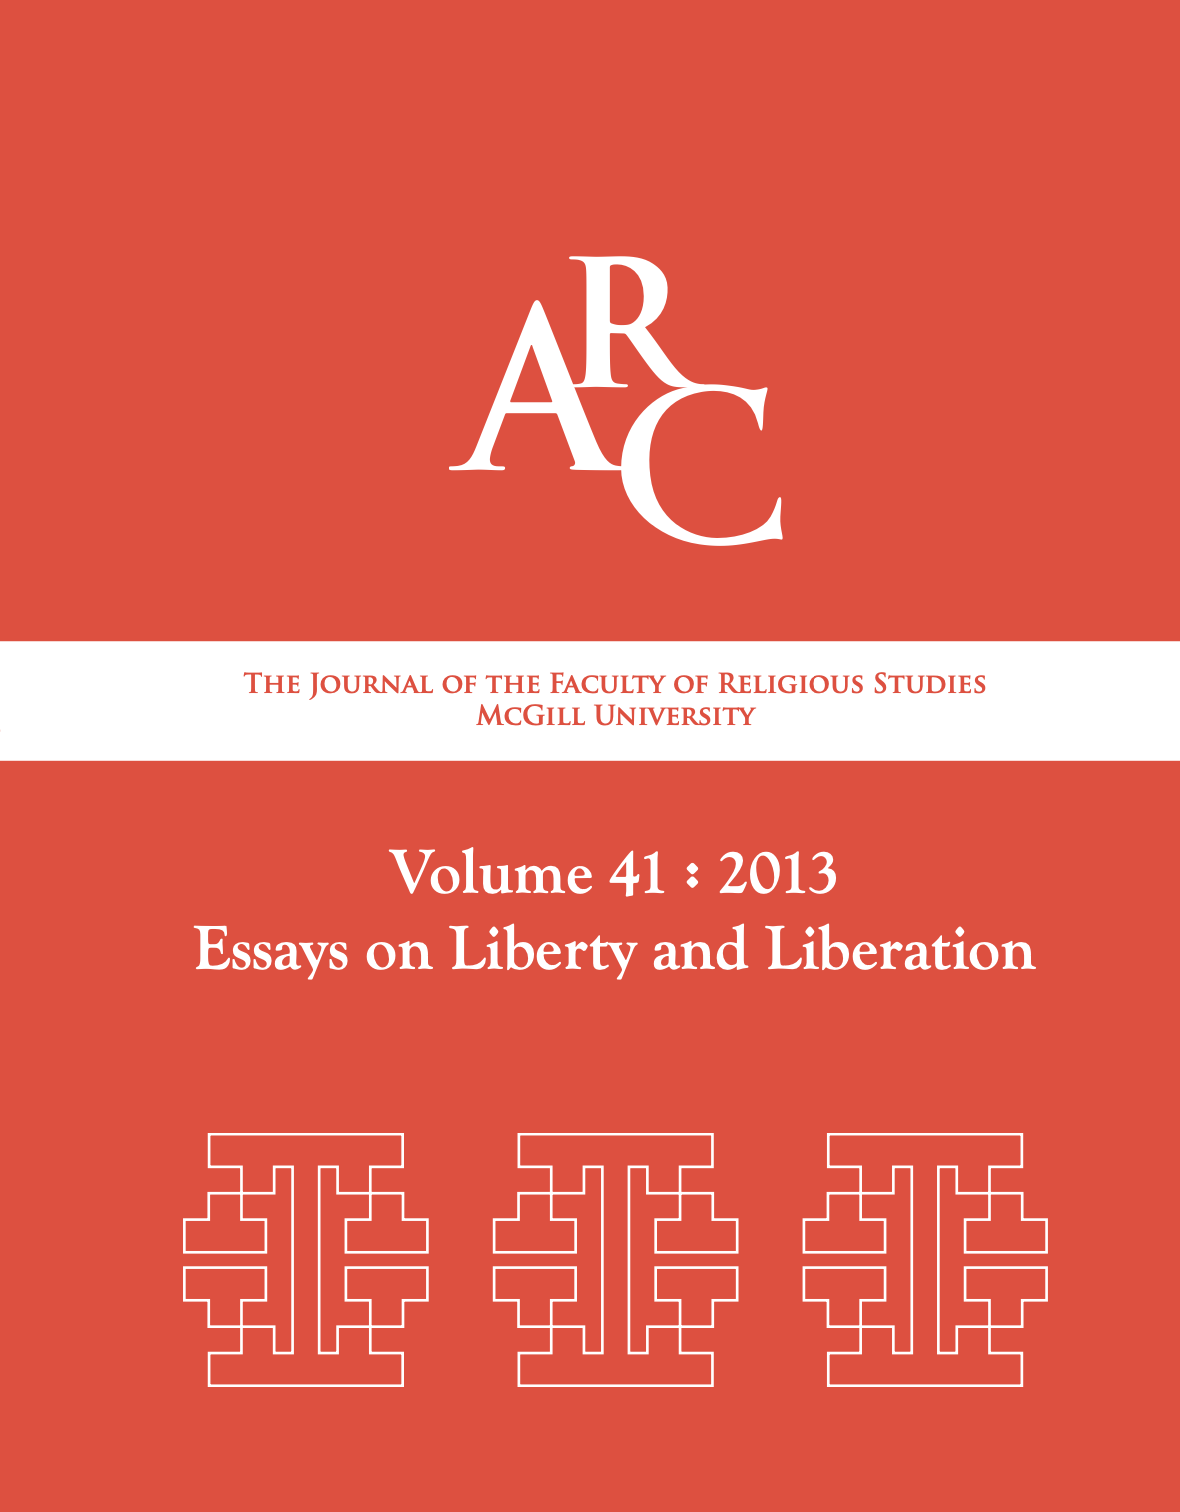 					Afficher Vol. 41 (2013): Arc: Essays on Liberty and Libteration
				